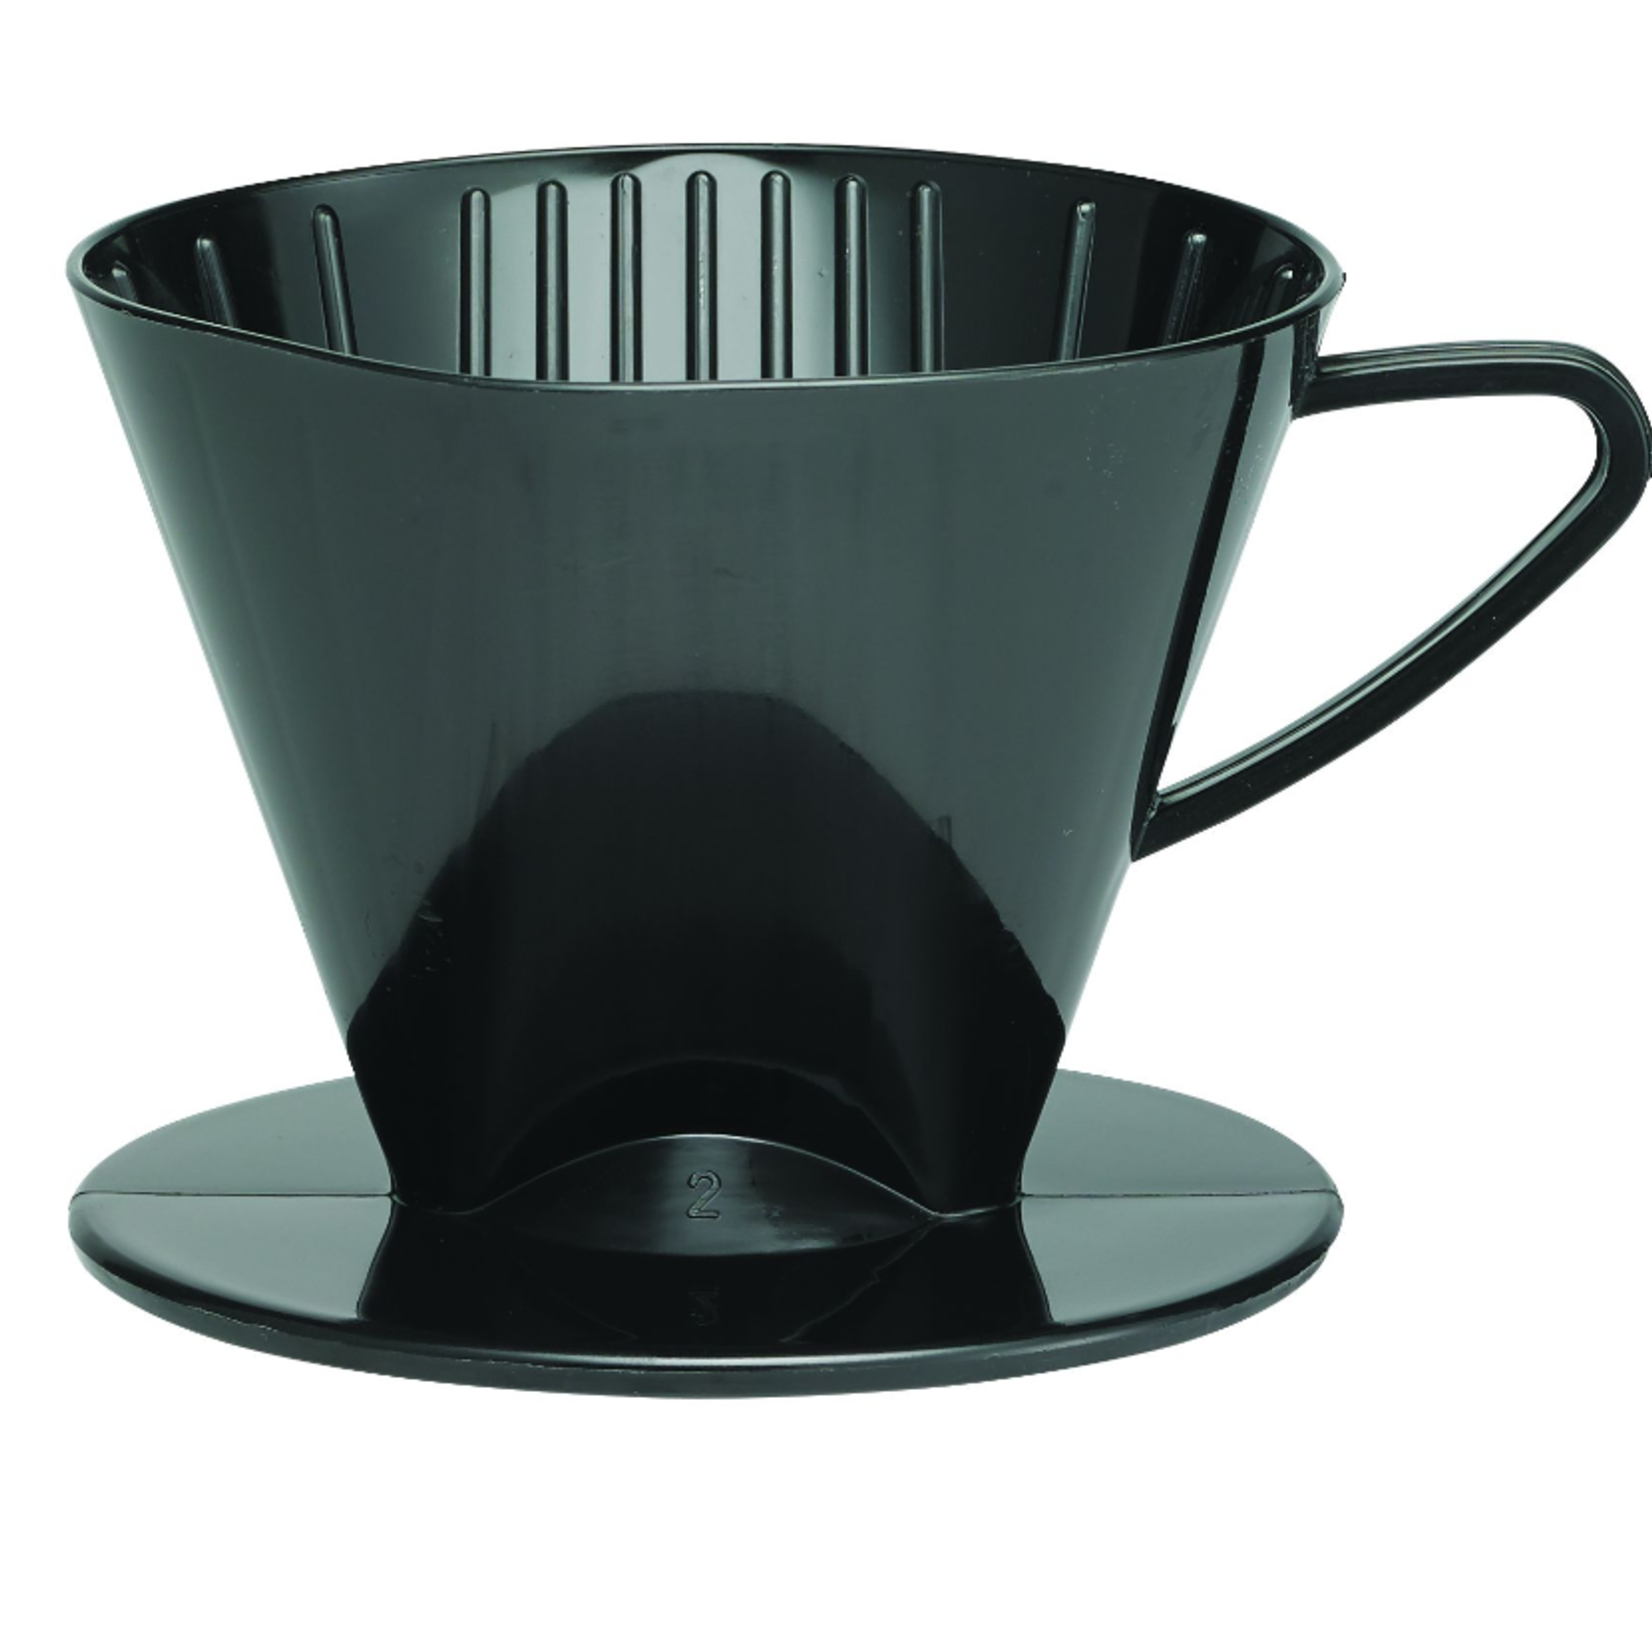 Harold Import Company Inc. Pour Over Filter, Plastic, #2